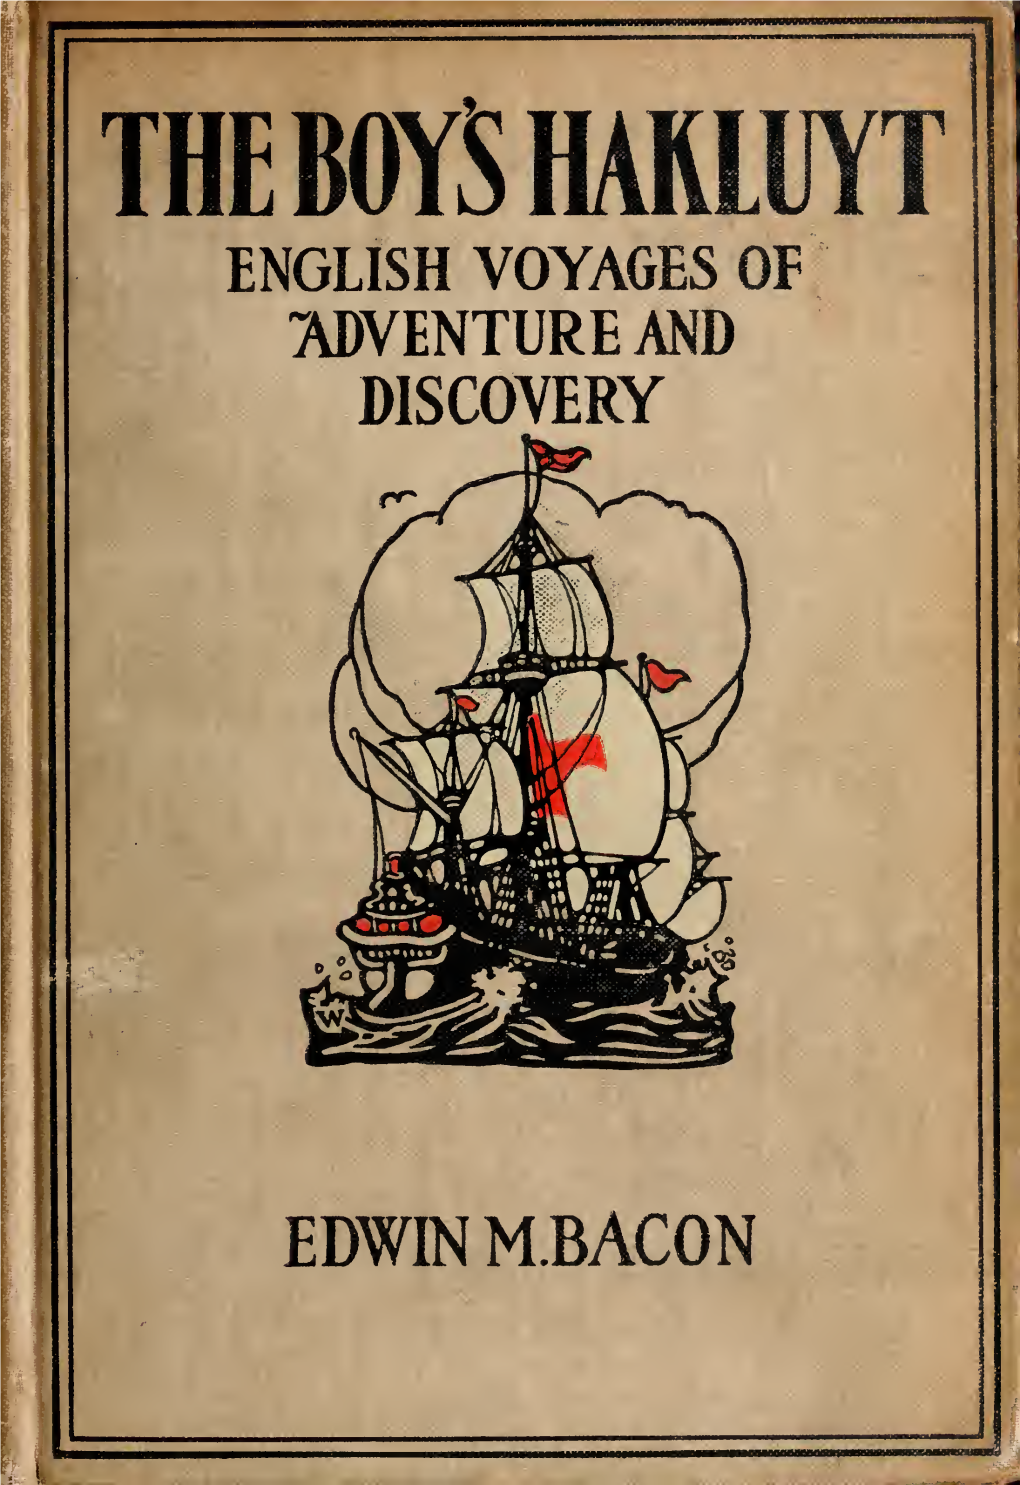 The Boy's Hakluyt : English Voyages of Adventure and Discovery